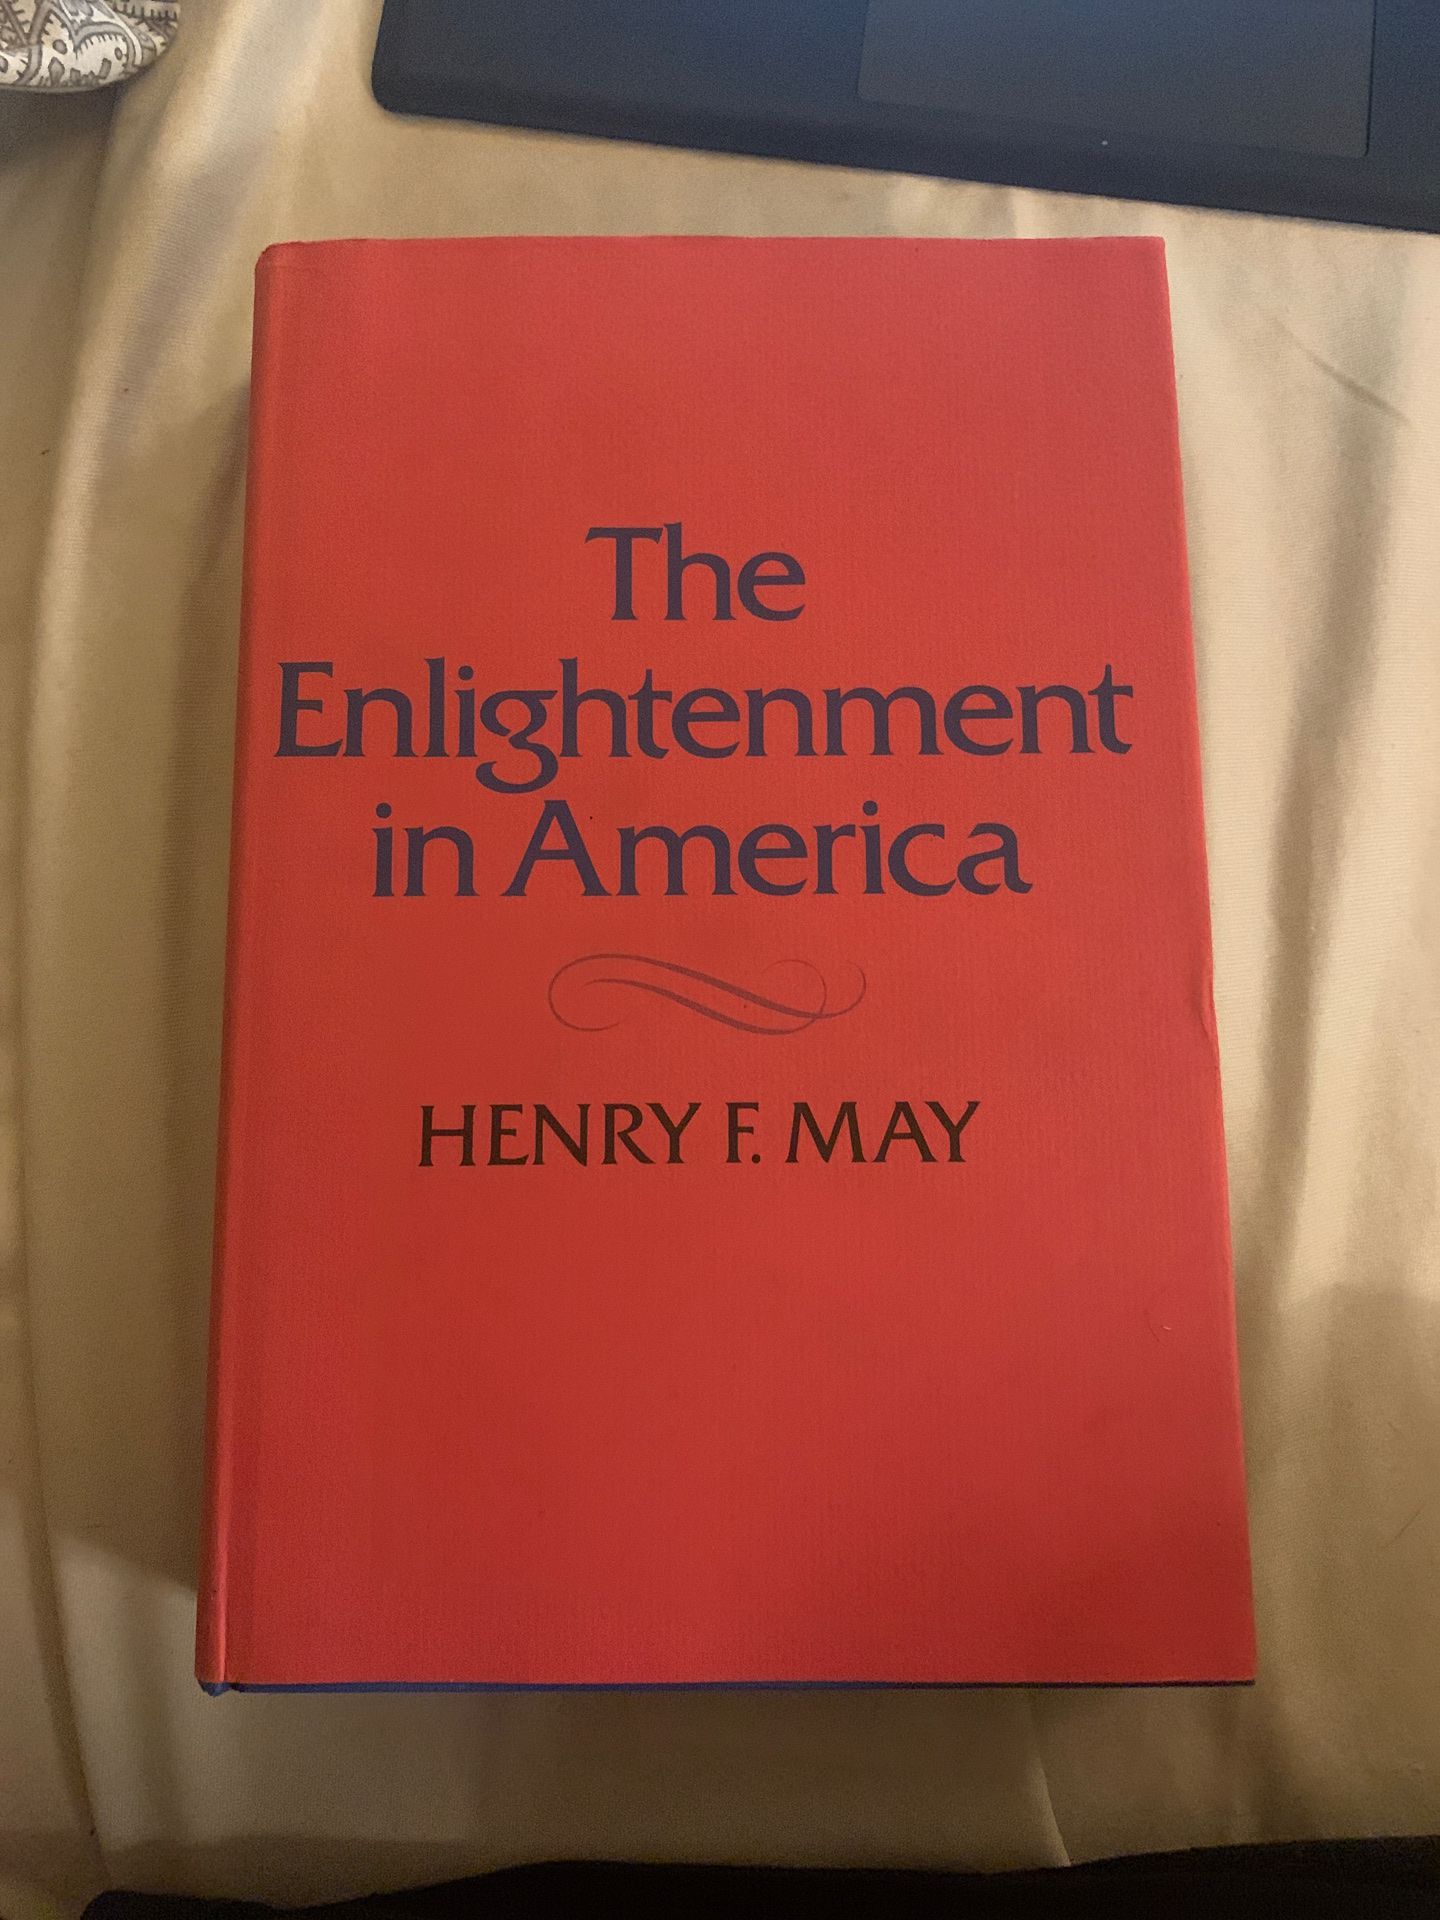 The Enlightenment in America by Henry F. May- Printed 1976